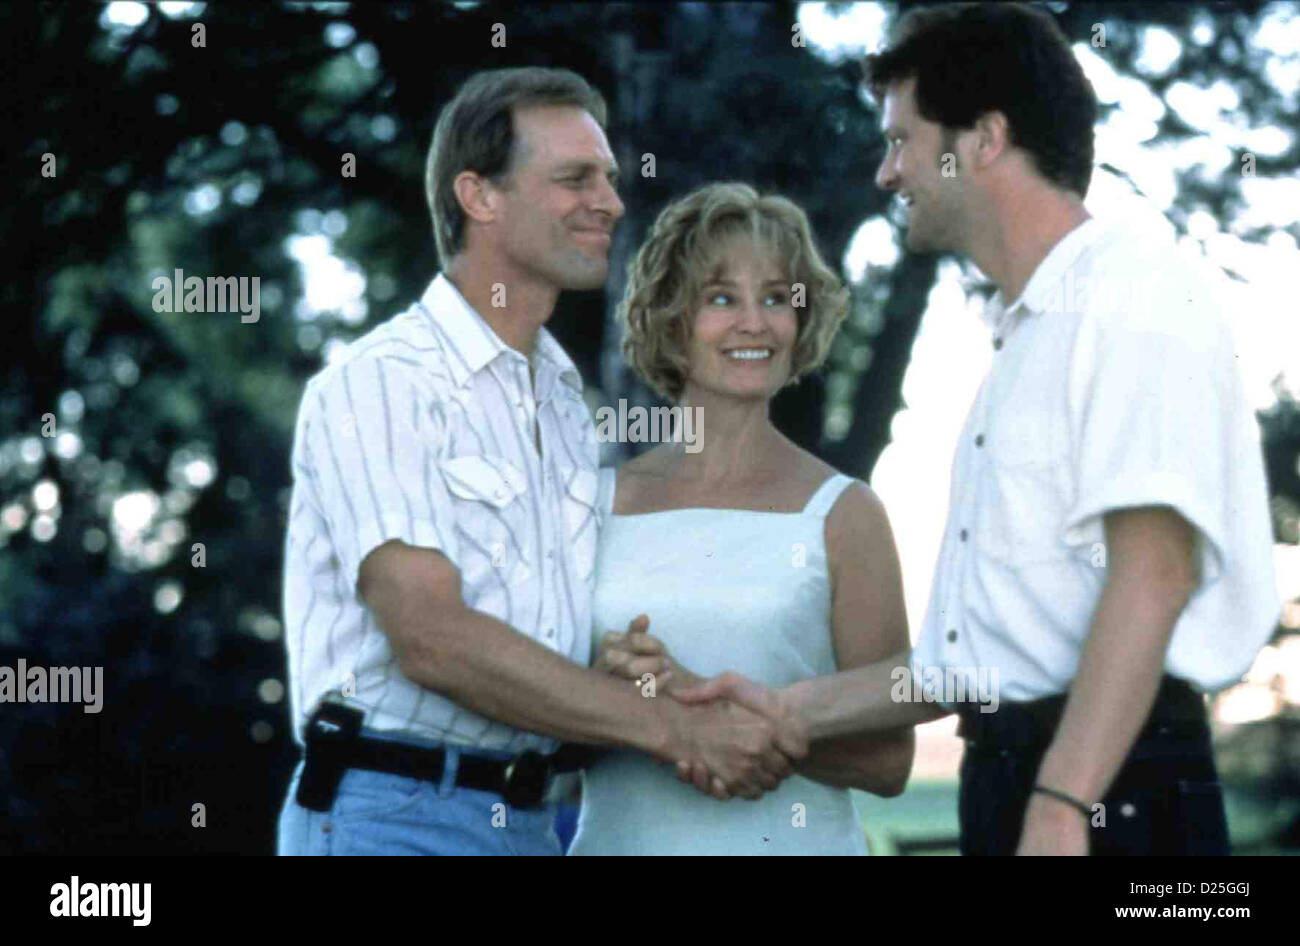 Tausend Morgen  Thousand Acres,  Keith Carradine, Jessica Lange, Colin Firth *** Local Caption *** 1997 IFTN/Polygram/Touchstone Stock Photo